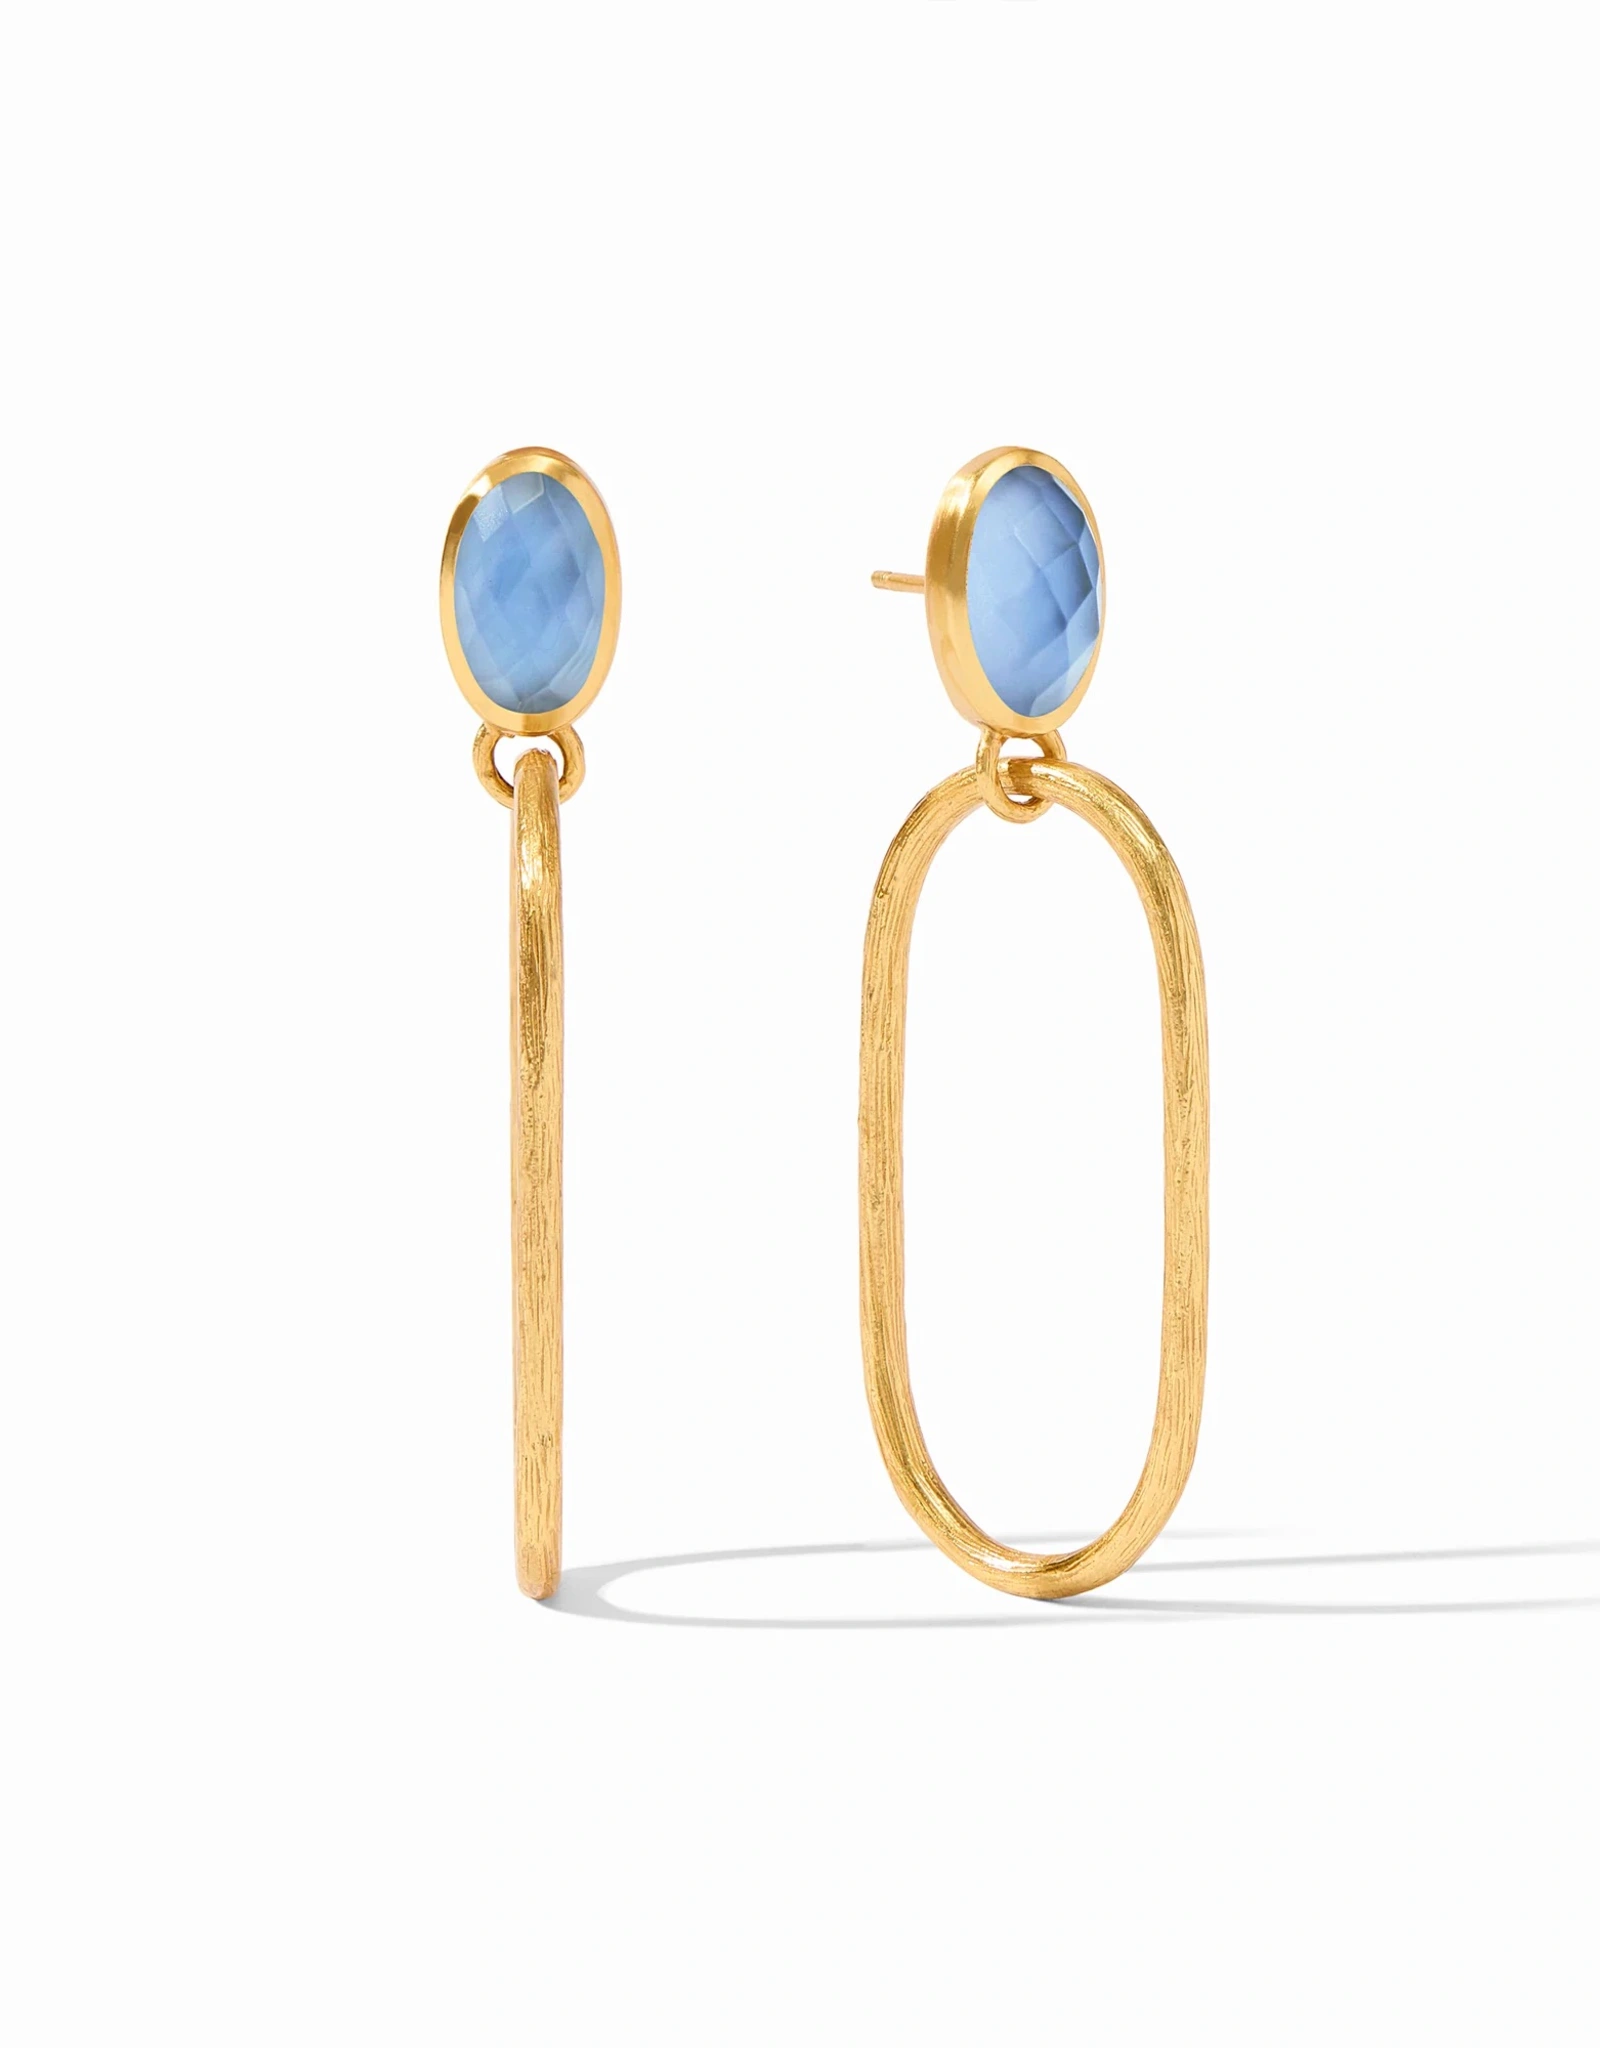 Julie Vos Julie Vos Ivy Statement Earrings Irid. Chalcedony Blue